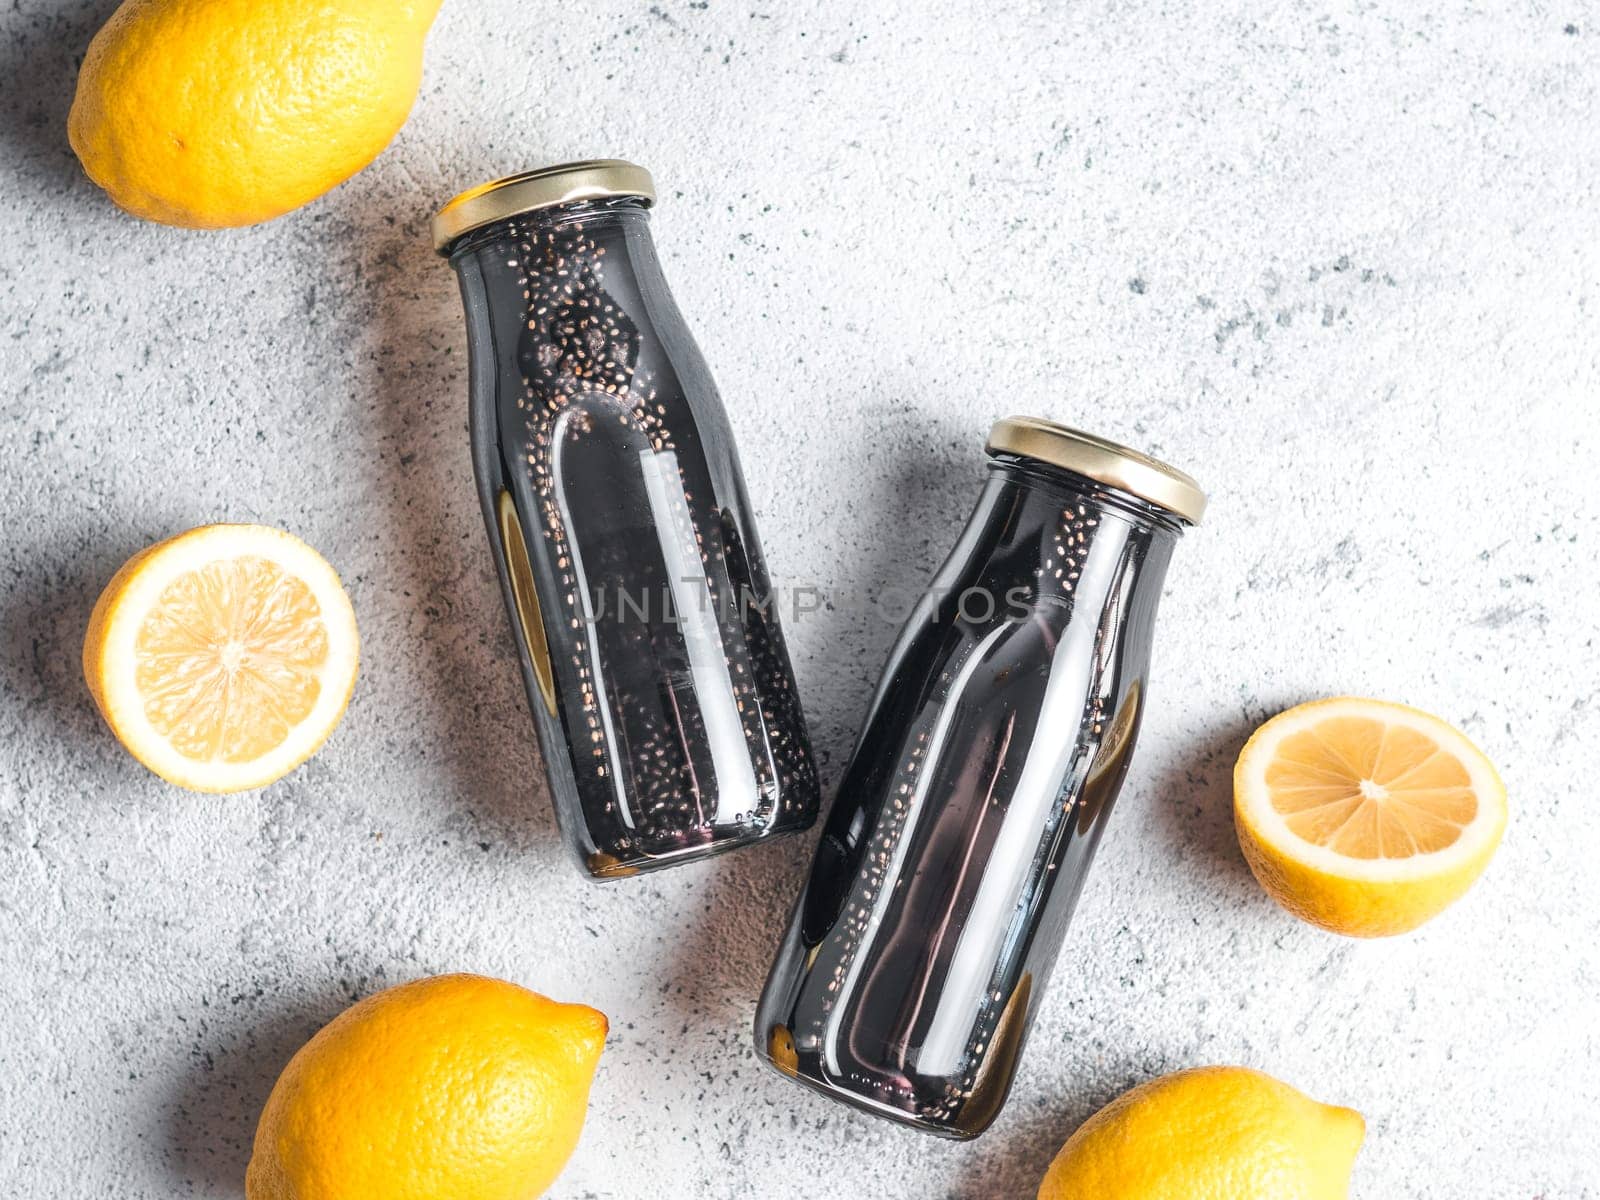 Detox activated charcoal black chia water or lemonade with lemon. Two bottle with black chia infused water. Detox drink idea and recipe. Vegan food and drink. Top view. Copy space for text.